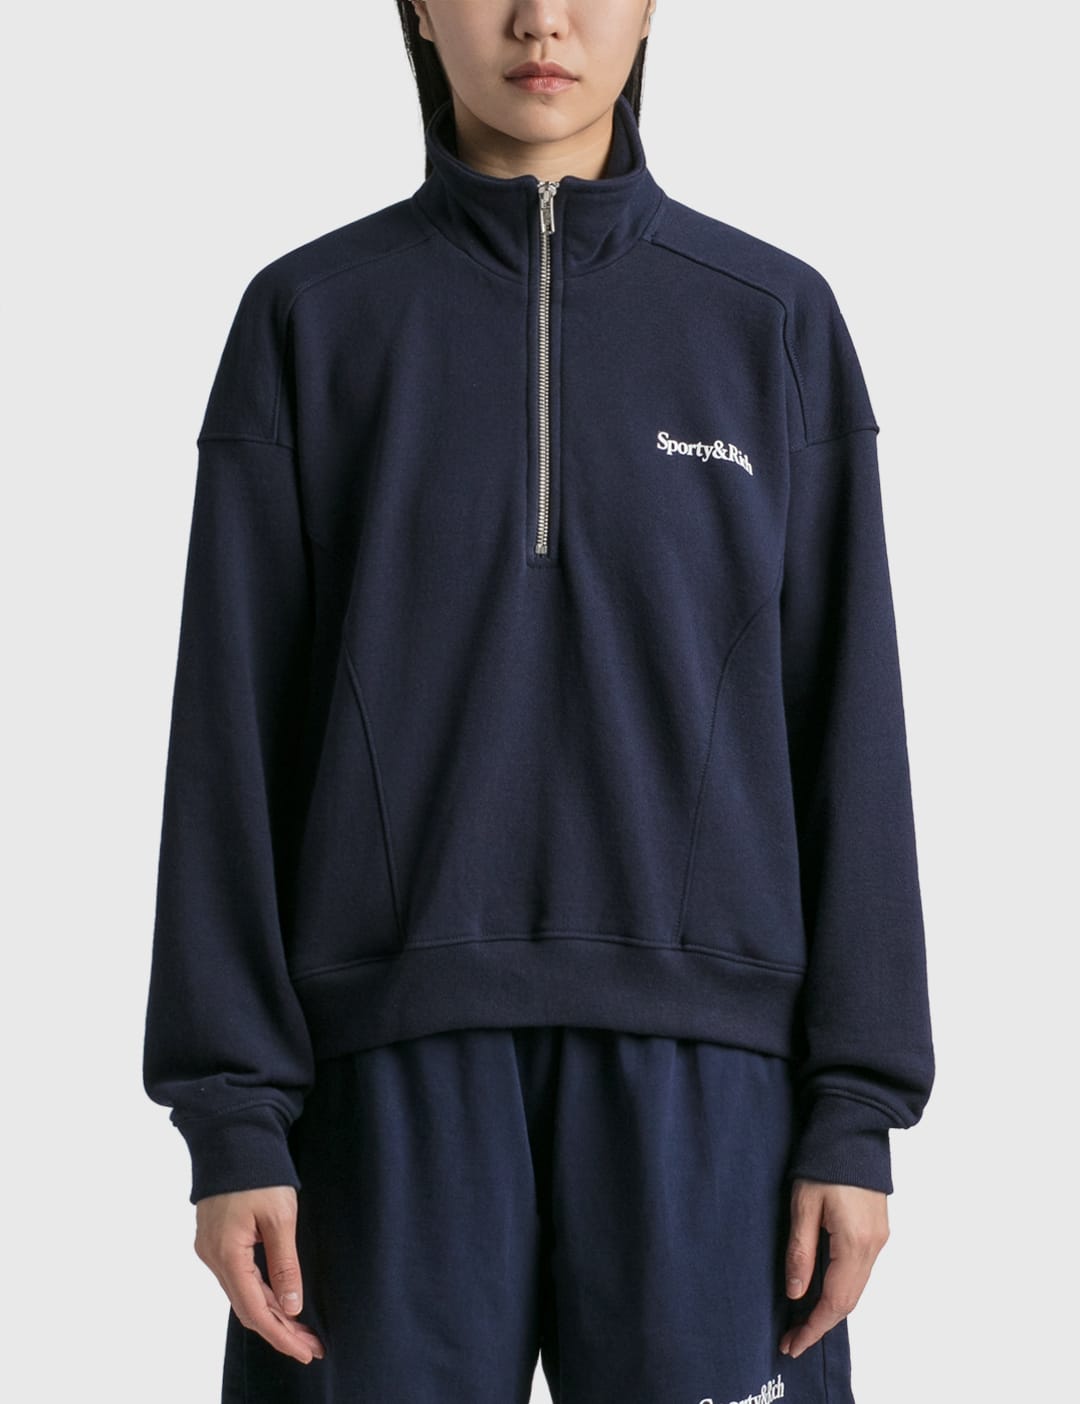 Sporty & Rich - NEW HEALTH QUARTER ZIP | HBX - Globally Curated Fashion and  Lifestyle by Hypebeast